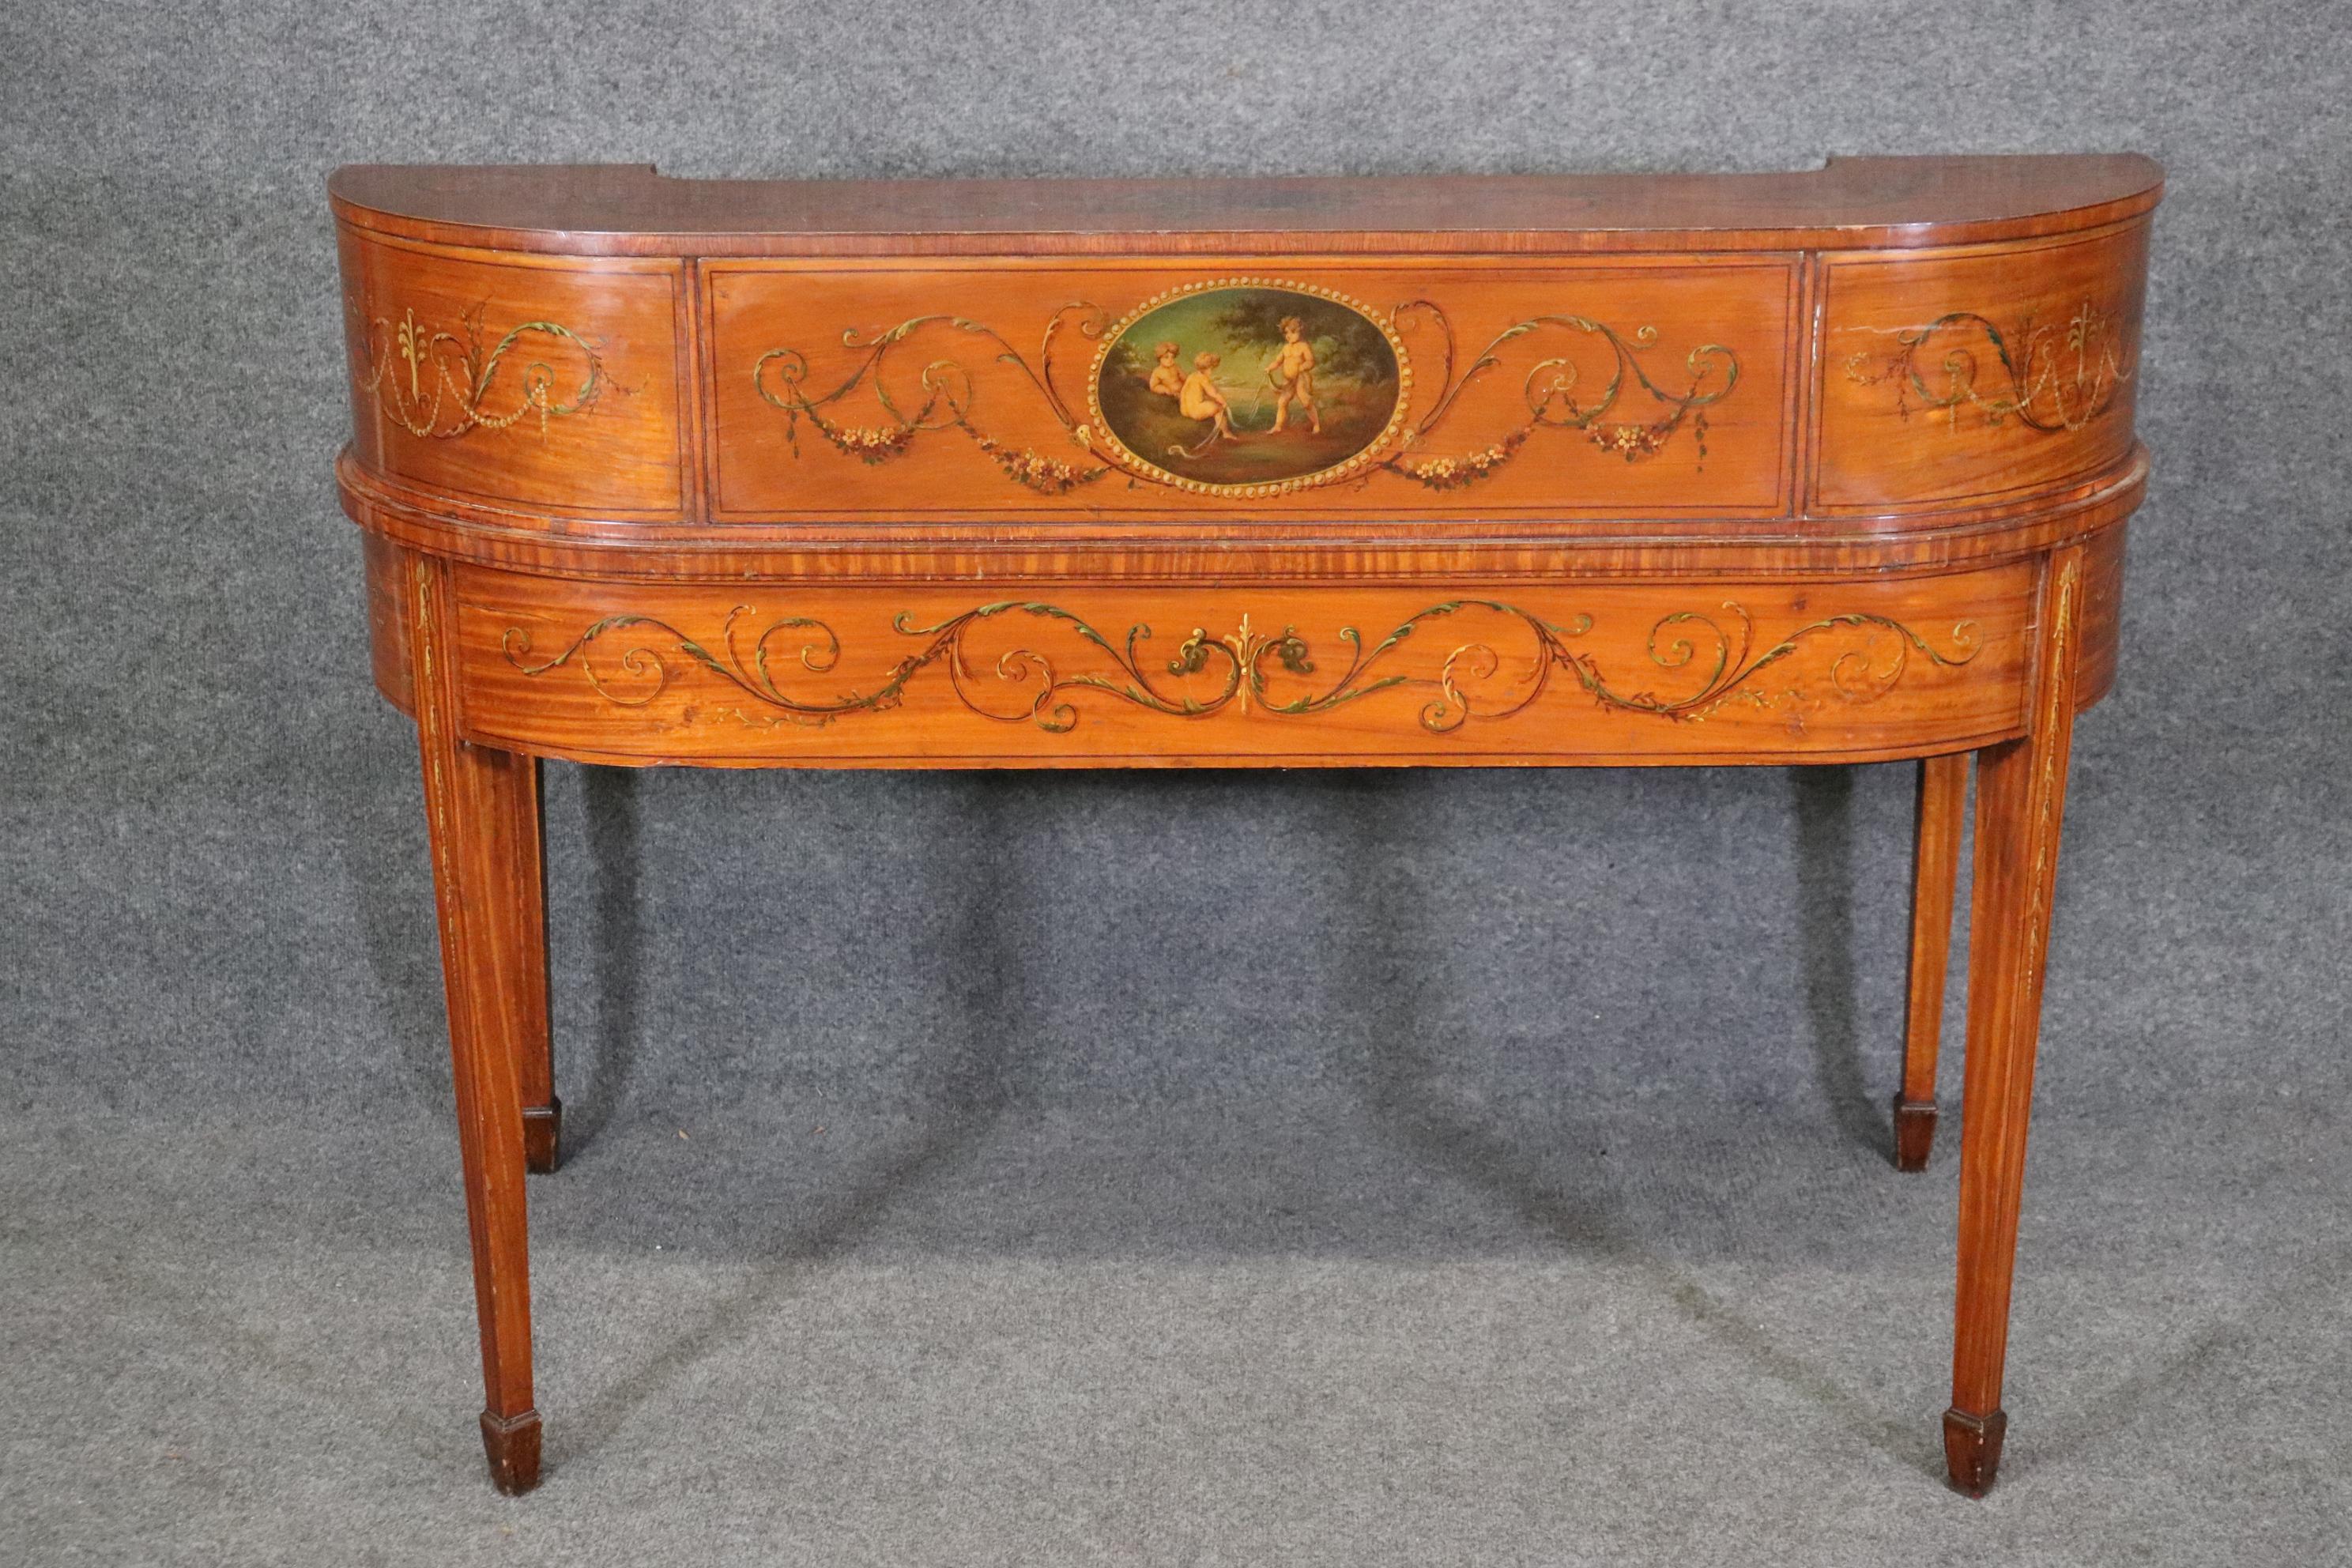 Fine Quality English Satinwood Carlton House Desk with Cherubs and Musical Theme For Sale 4